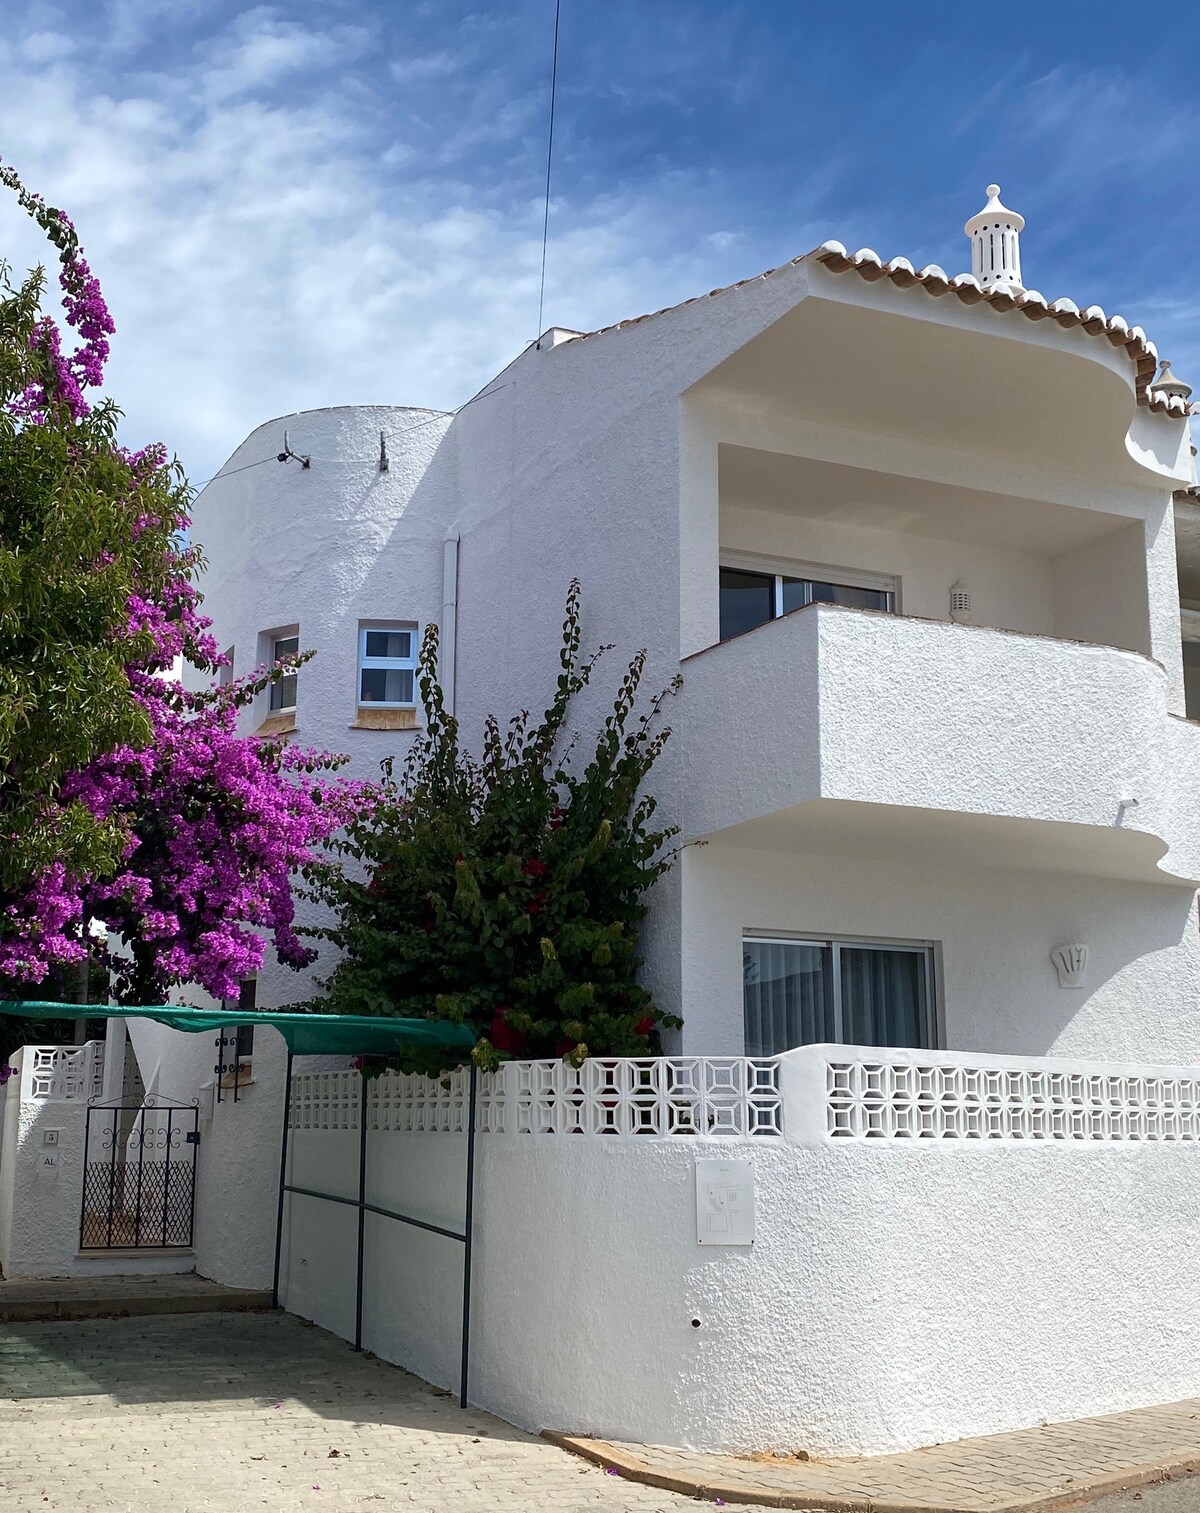 2 bed 2 bath townhouse, 2 mins from the beach